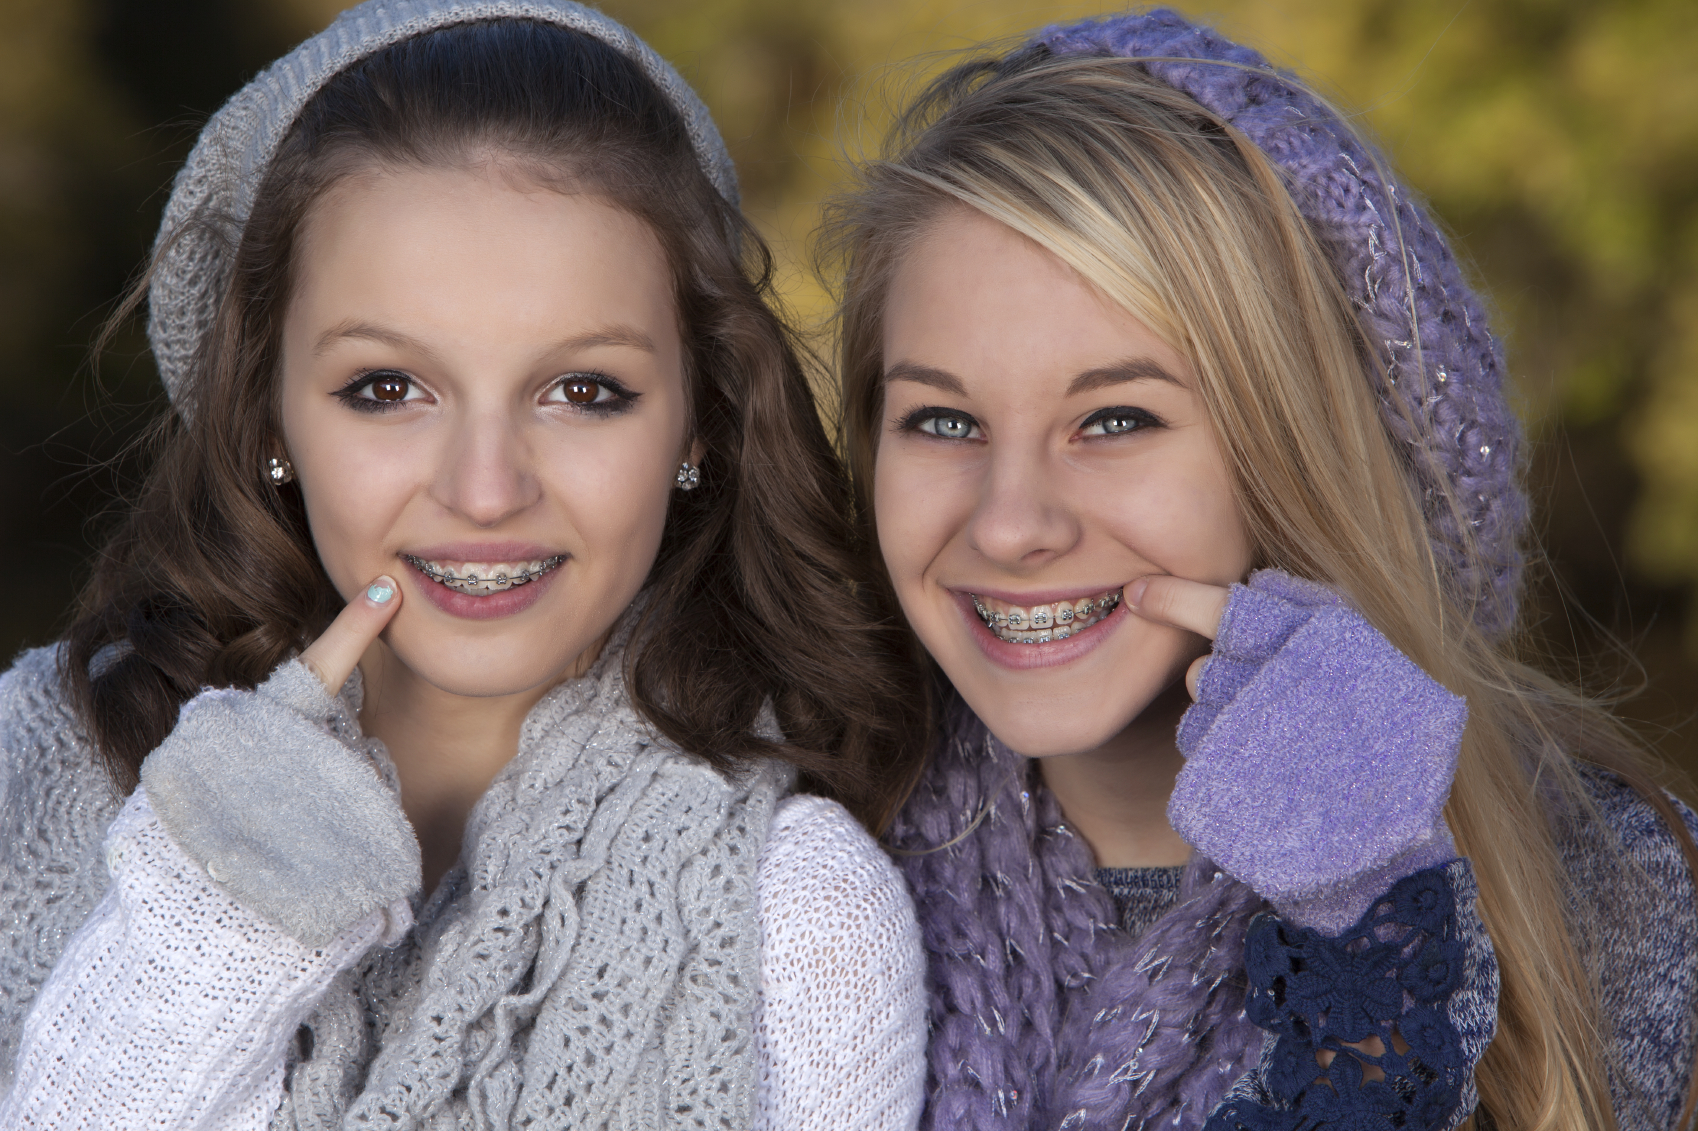 Two girls dressed up with braces